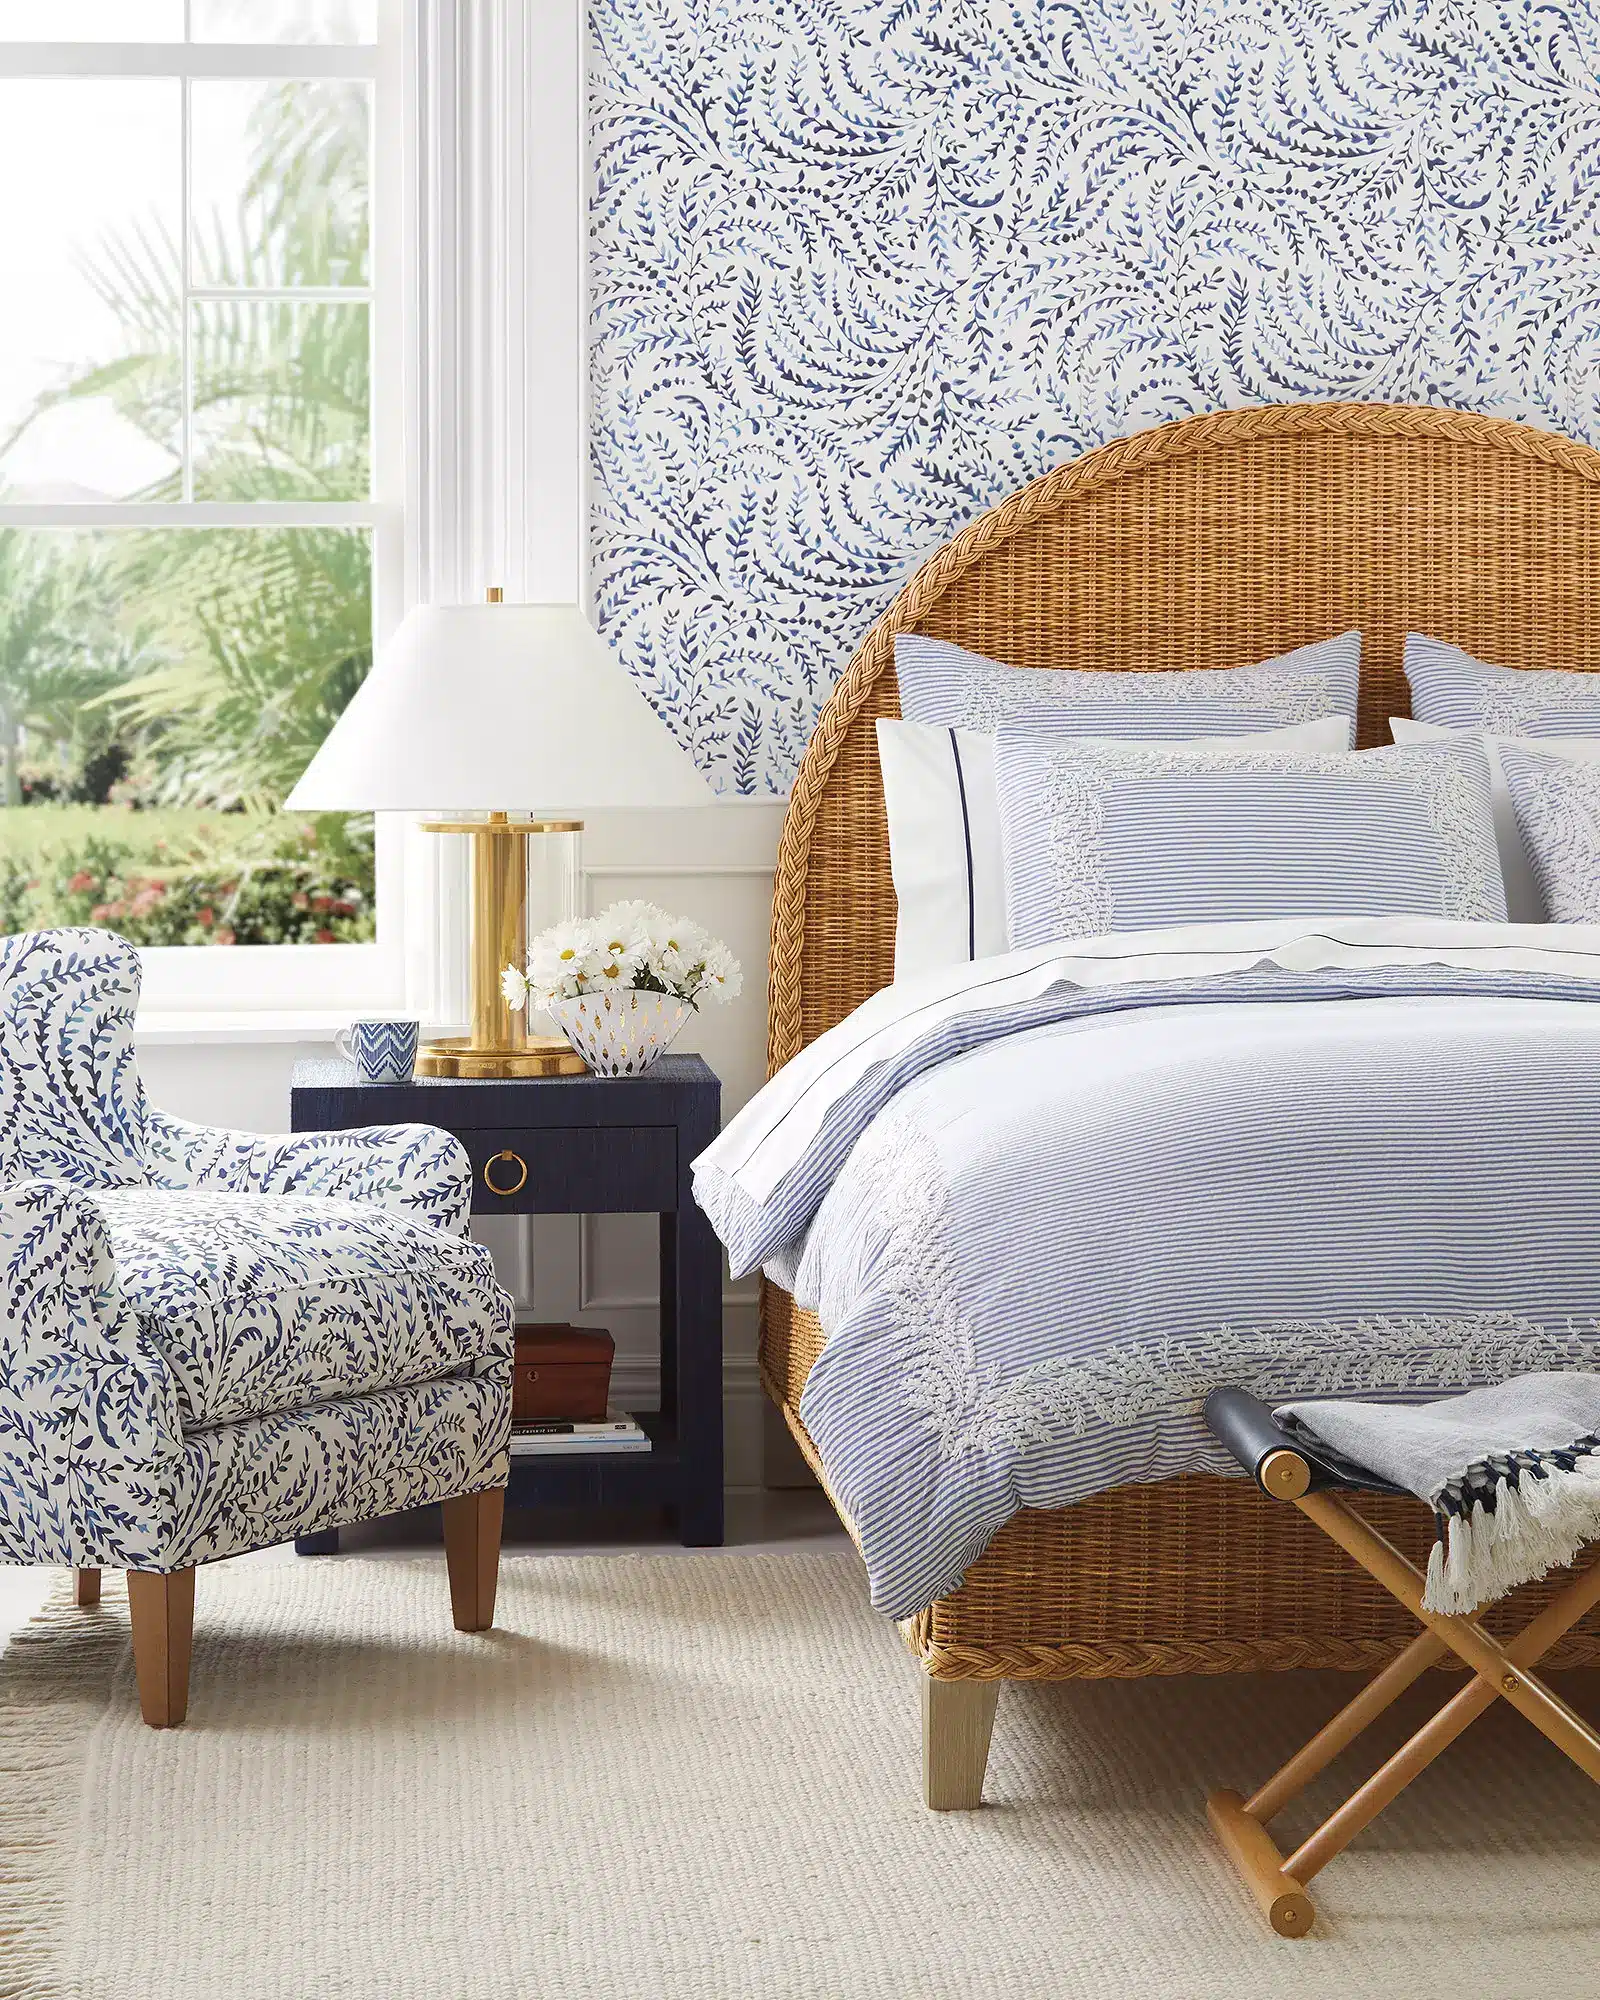 Update Your Bedroom for Summer - serena & lily